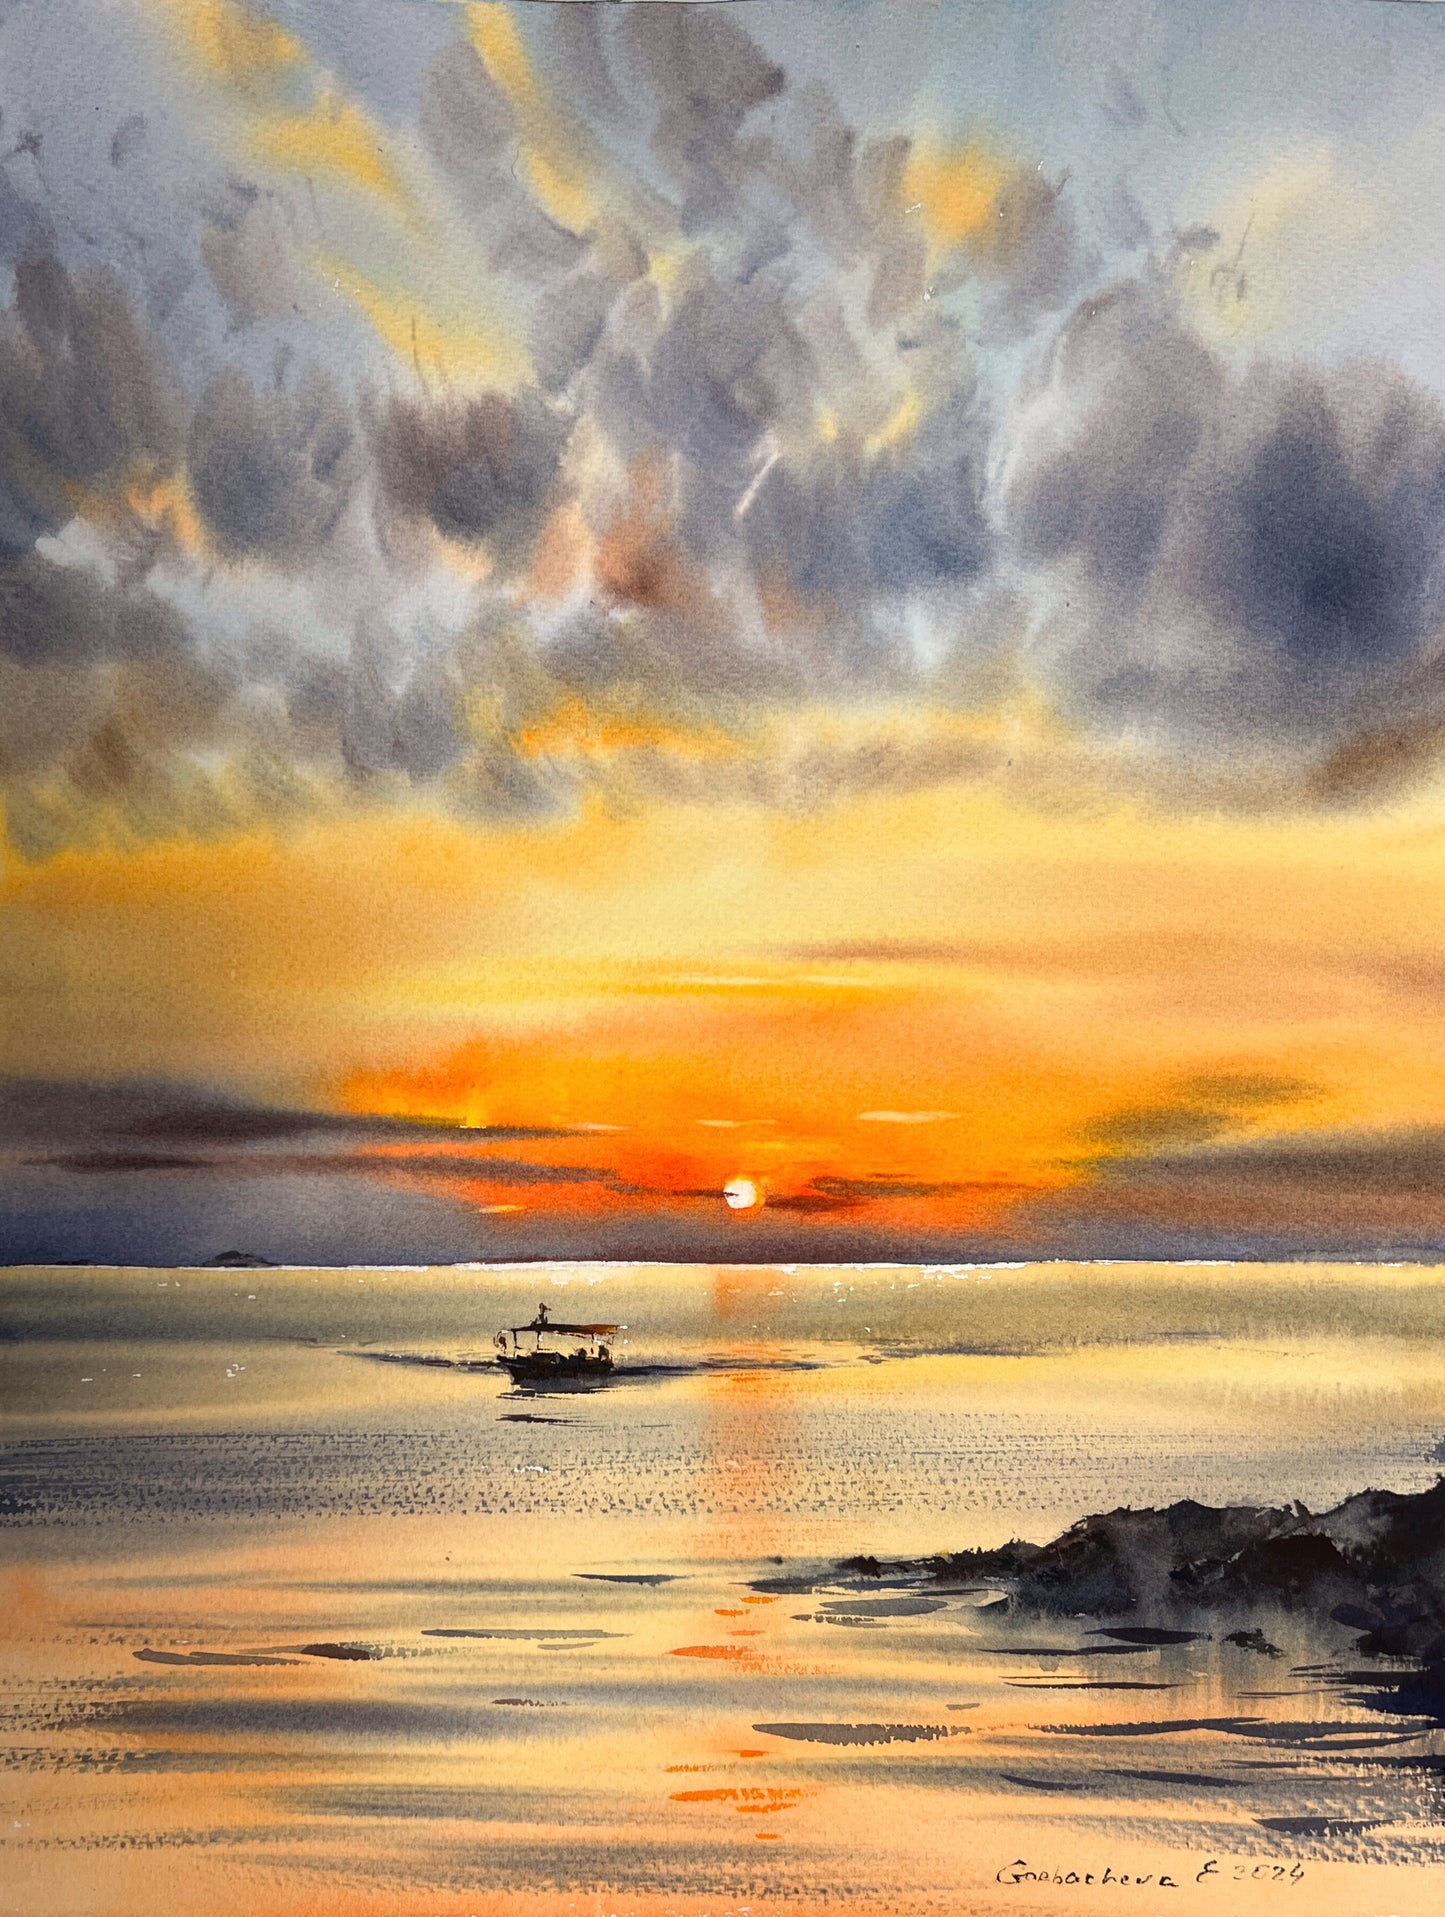 "Orange Sunset #25" Watercolor Painting - Serene Coastal Sunset Artwork, Great for Home Decor or Anniversary Gift